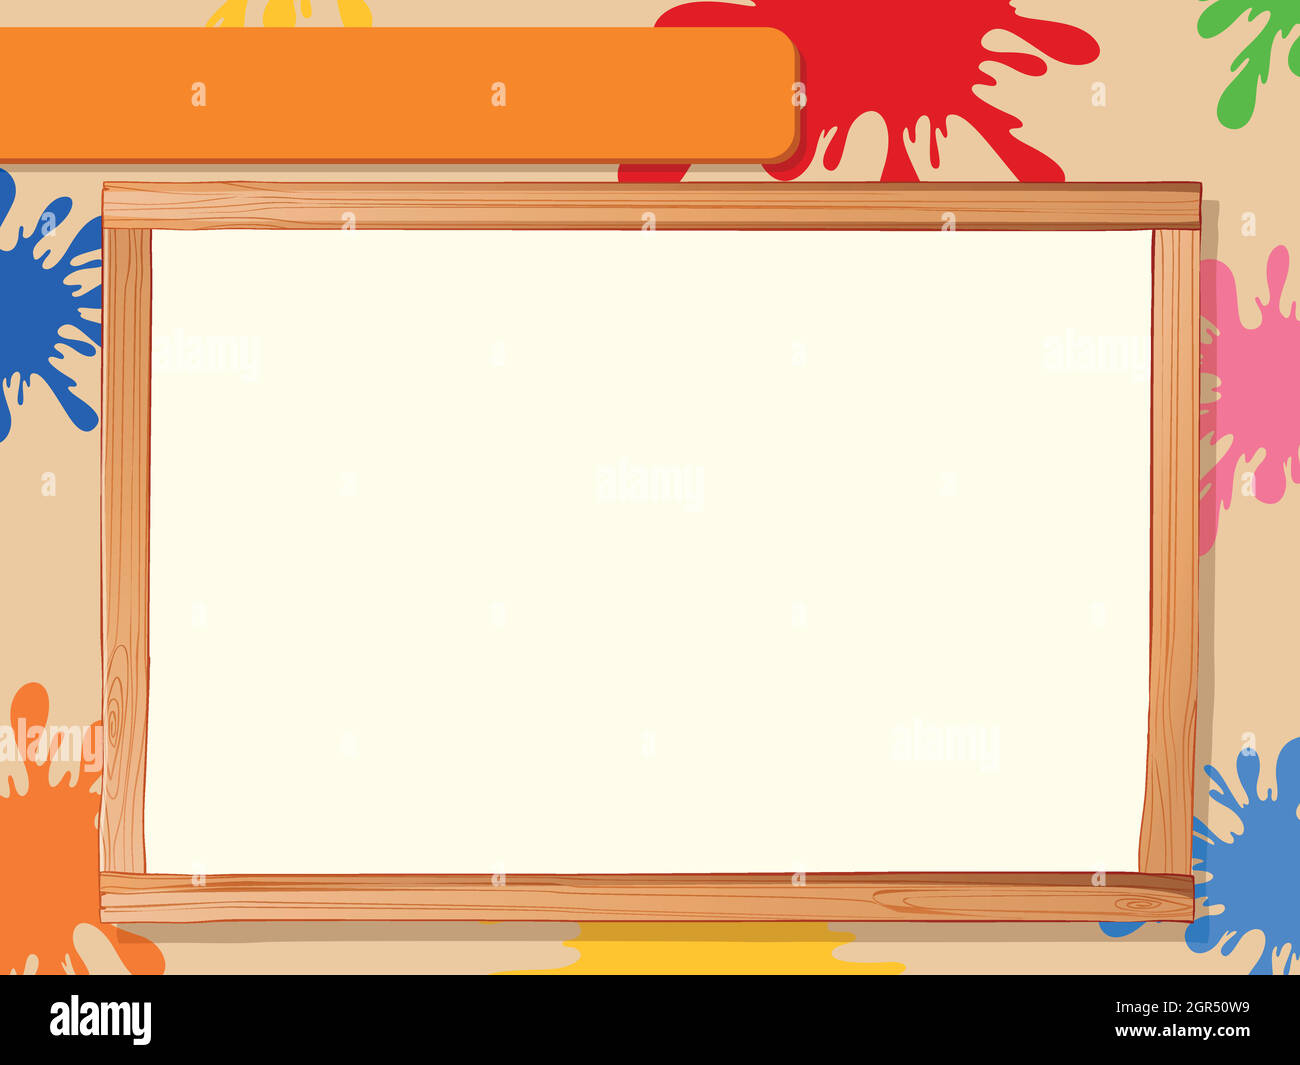 Wooden frame with colour paint Stock Vector